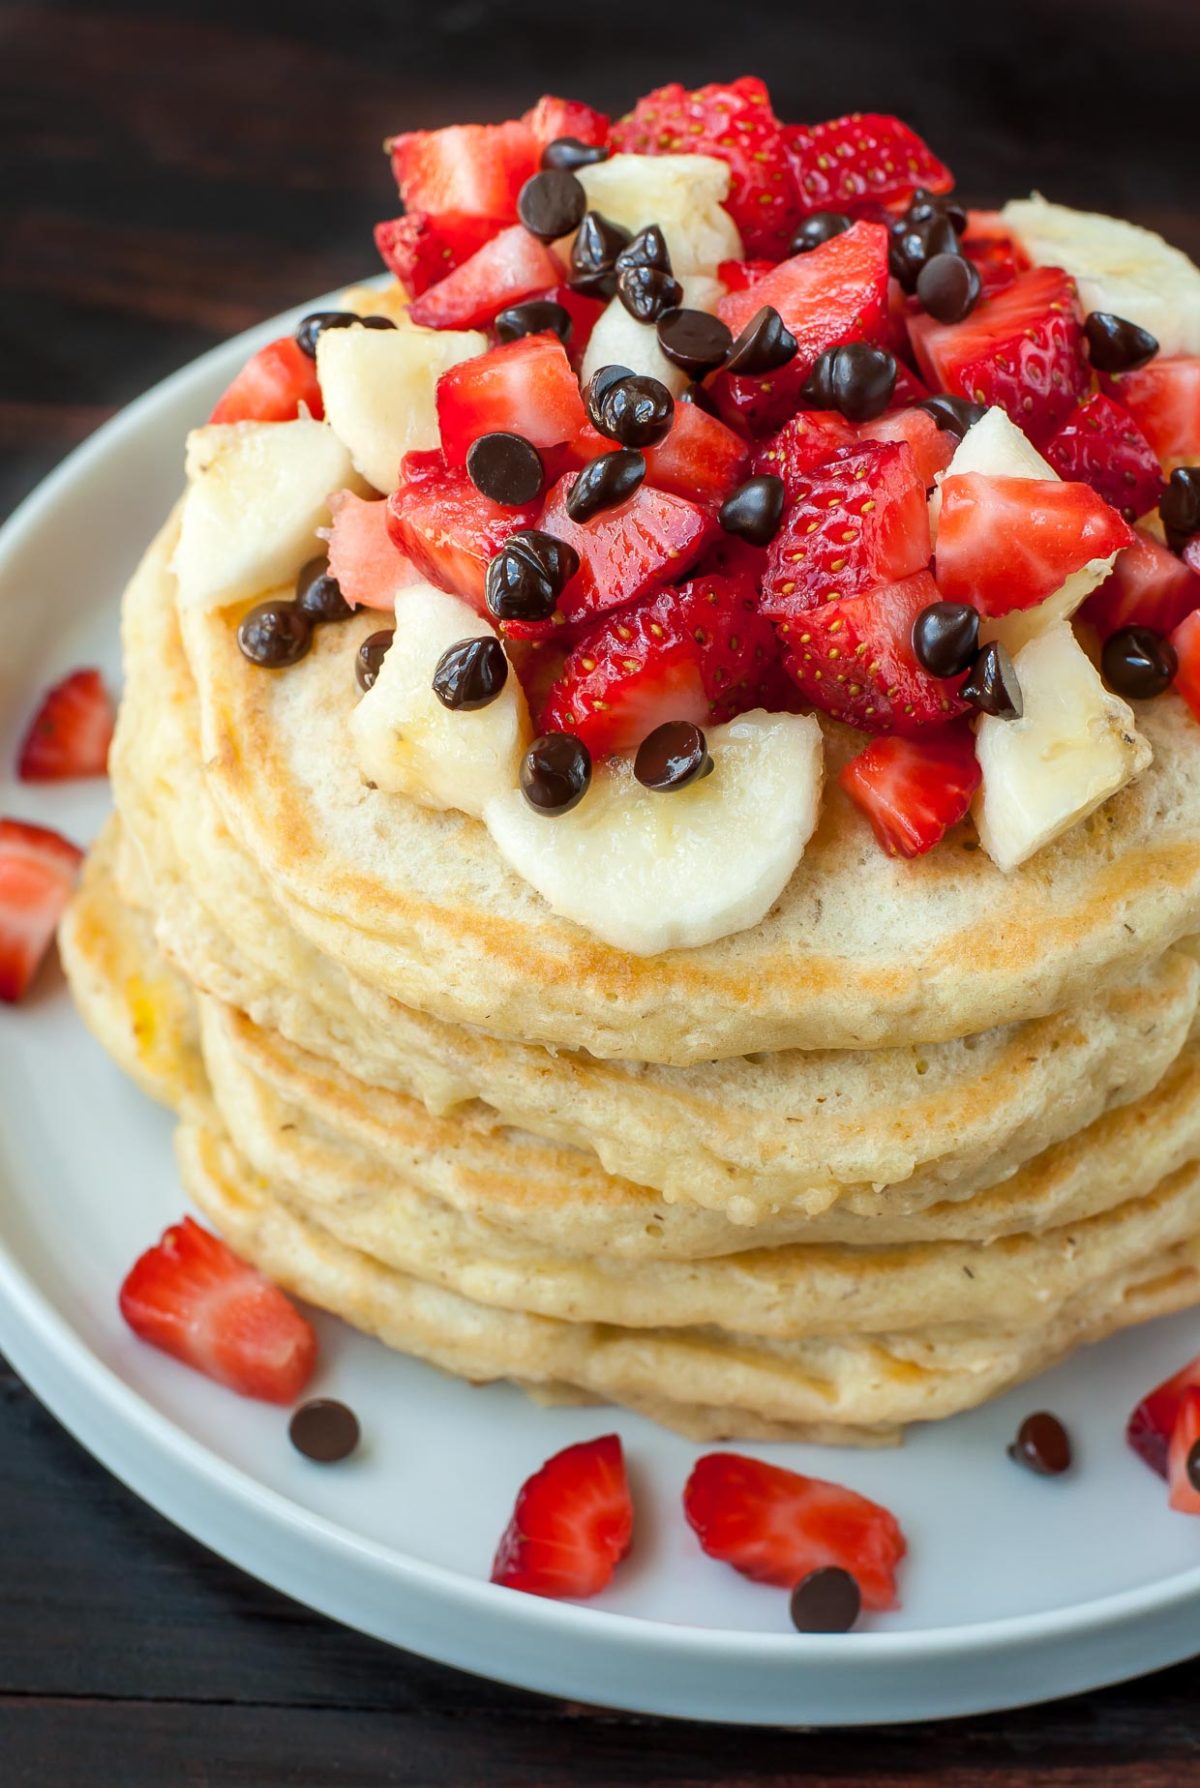 Perfectly fluffy pancakes topped with banana, strawberries, and a kiss of dark chocolate chips, these Banana Split Pancakes are a healthy spin on dessert pancakes!